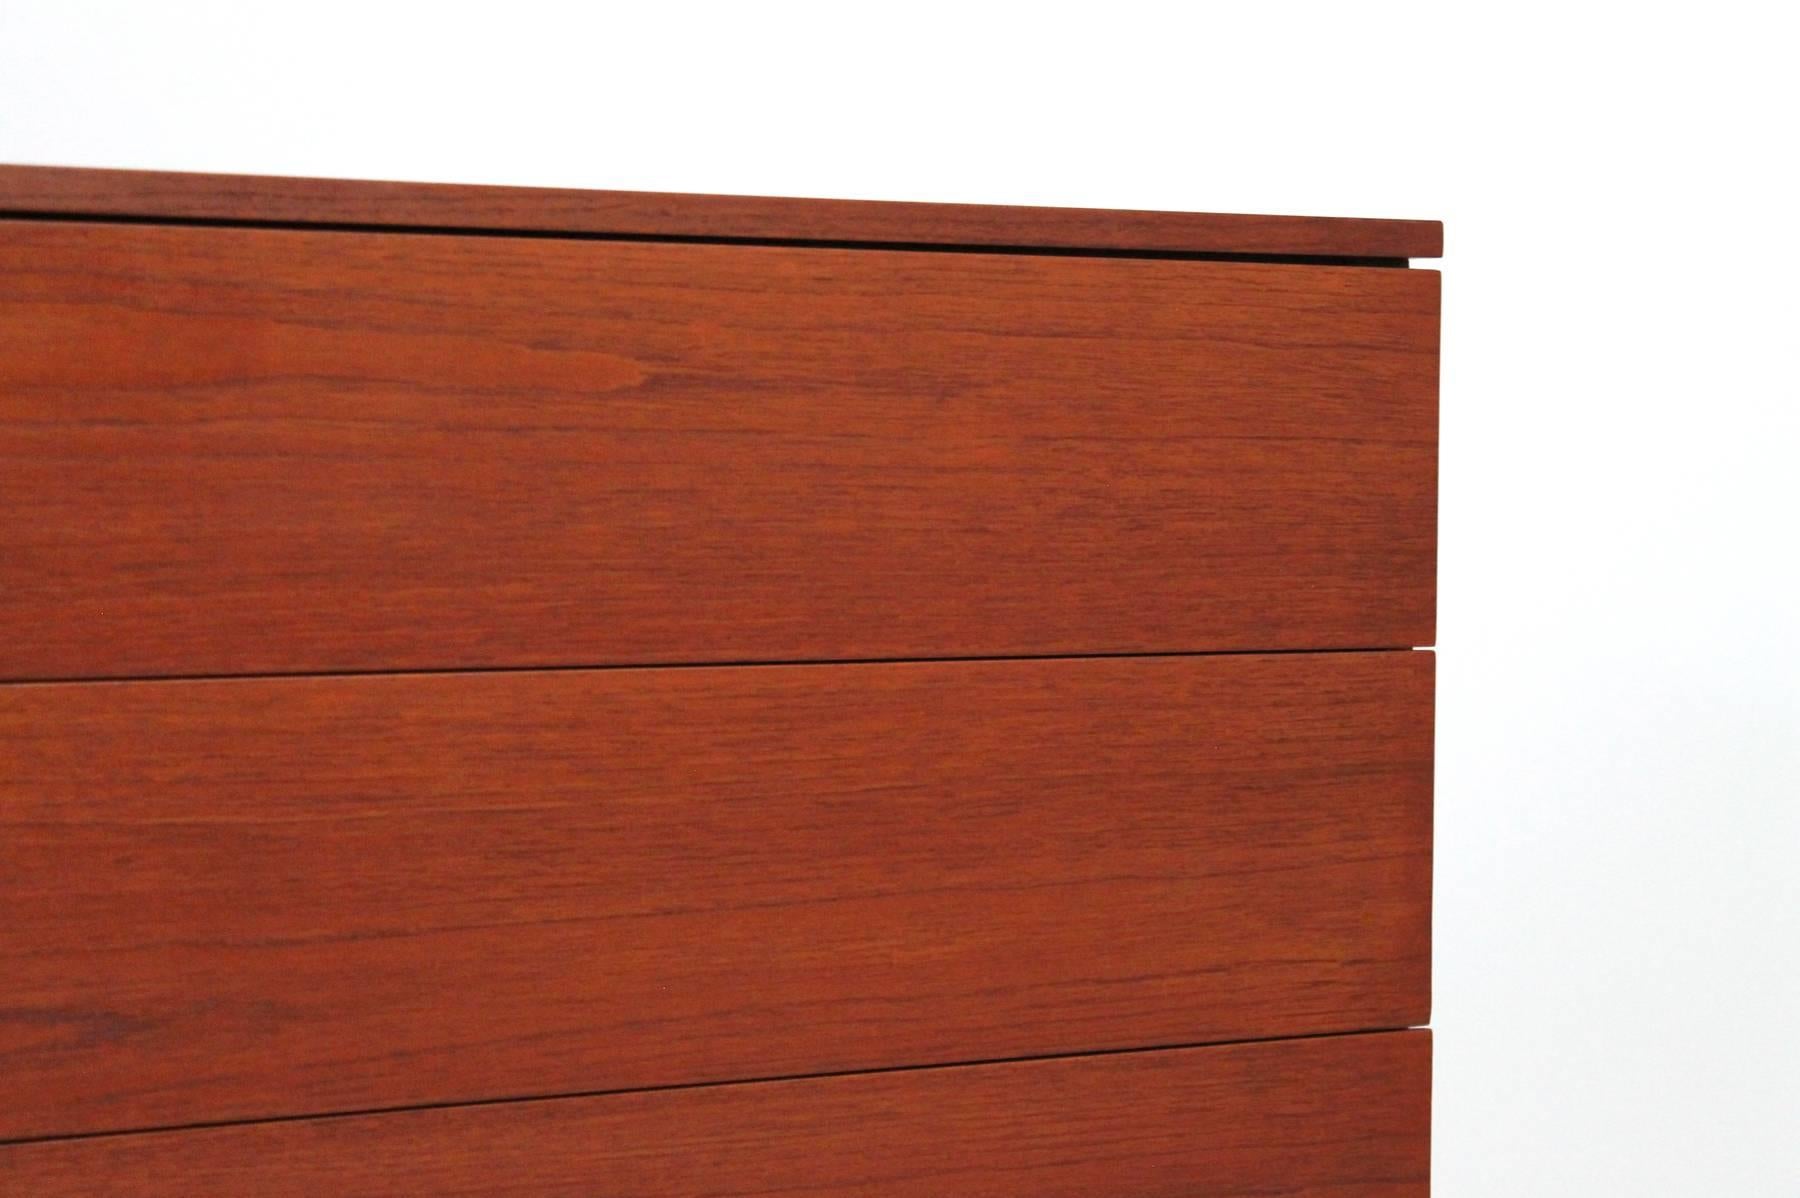 Pair of Teak Dressers by Florence Knoll (Stahl)